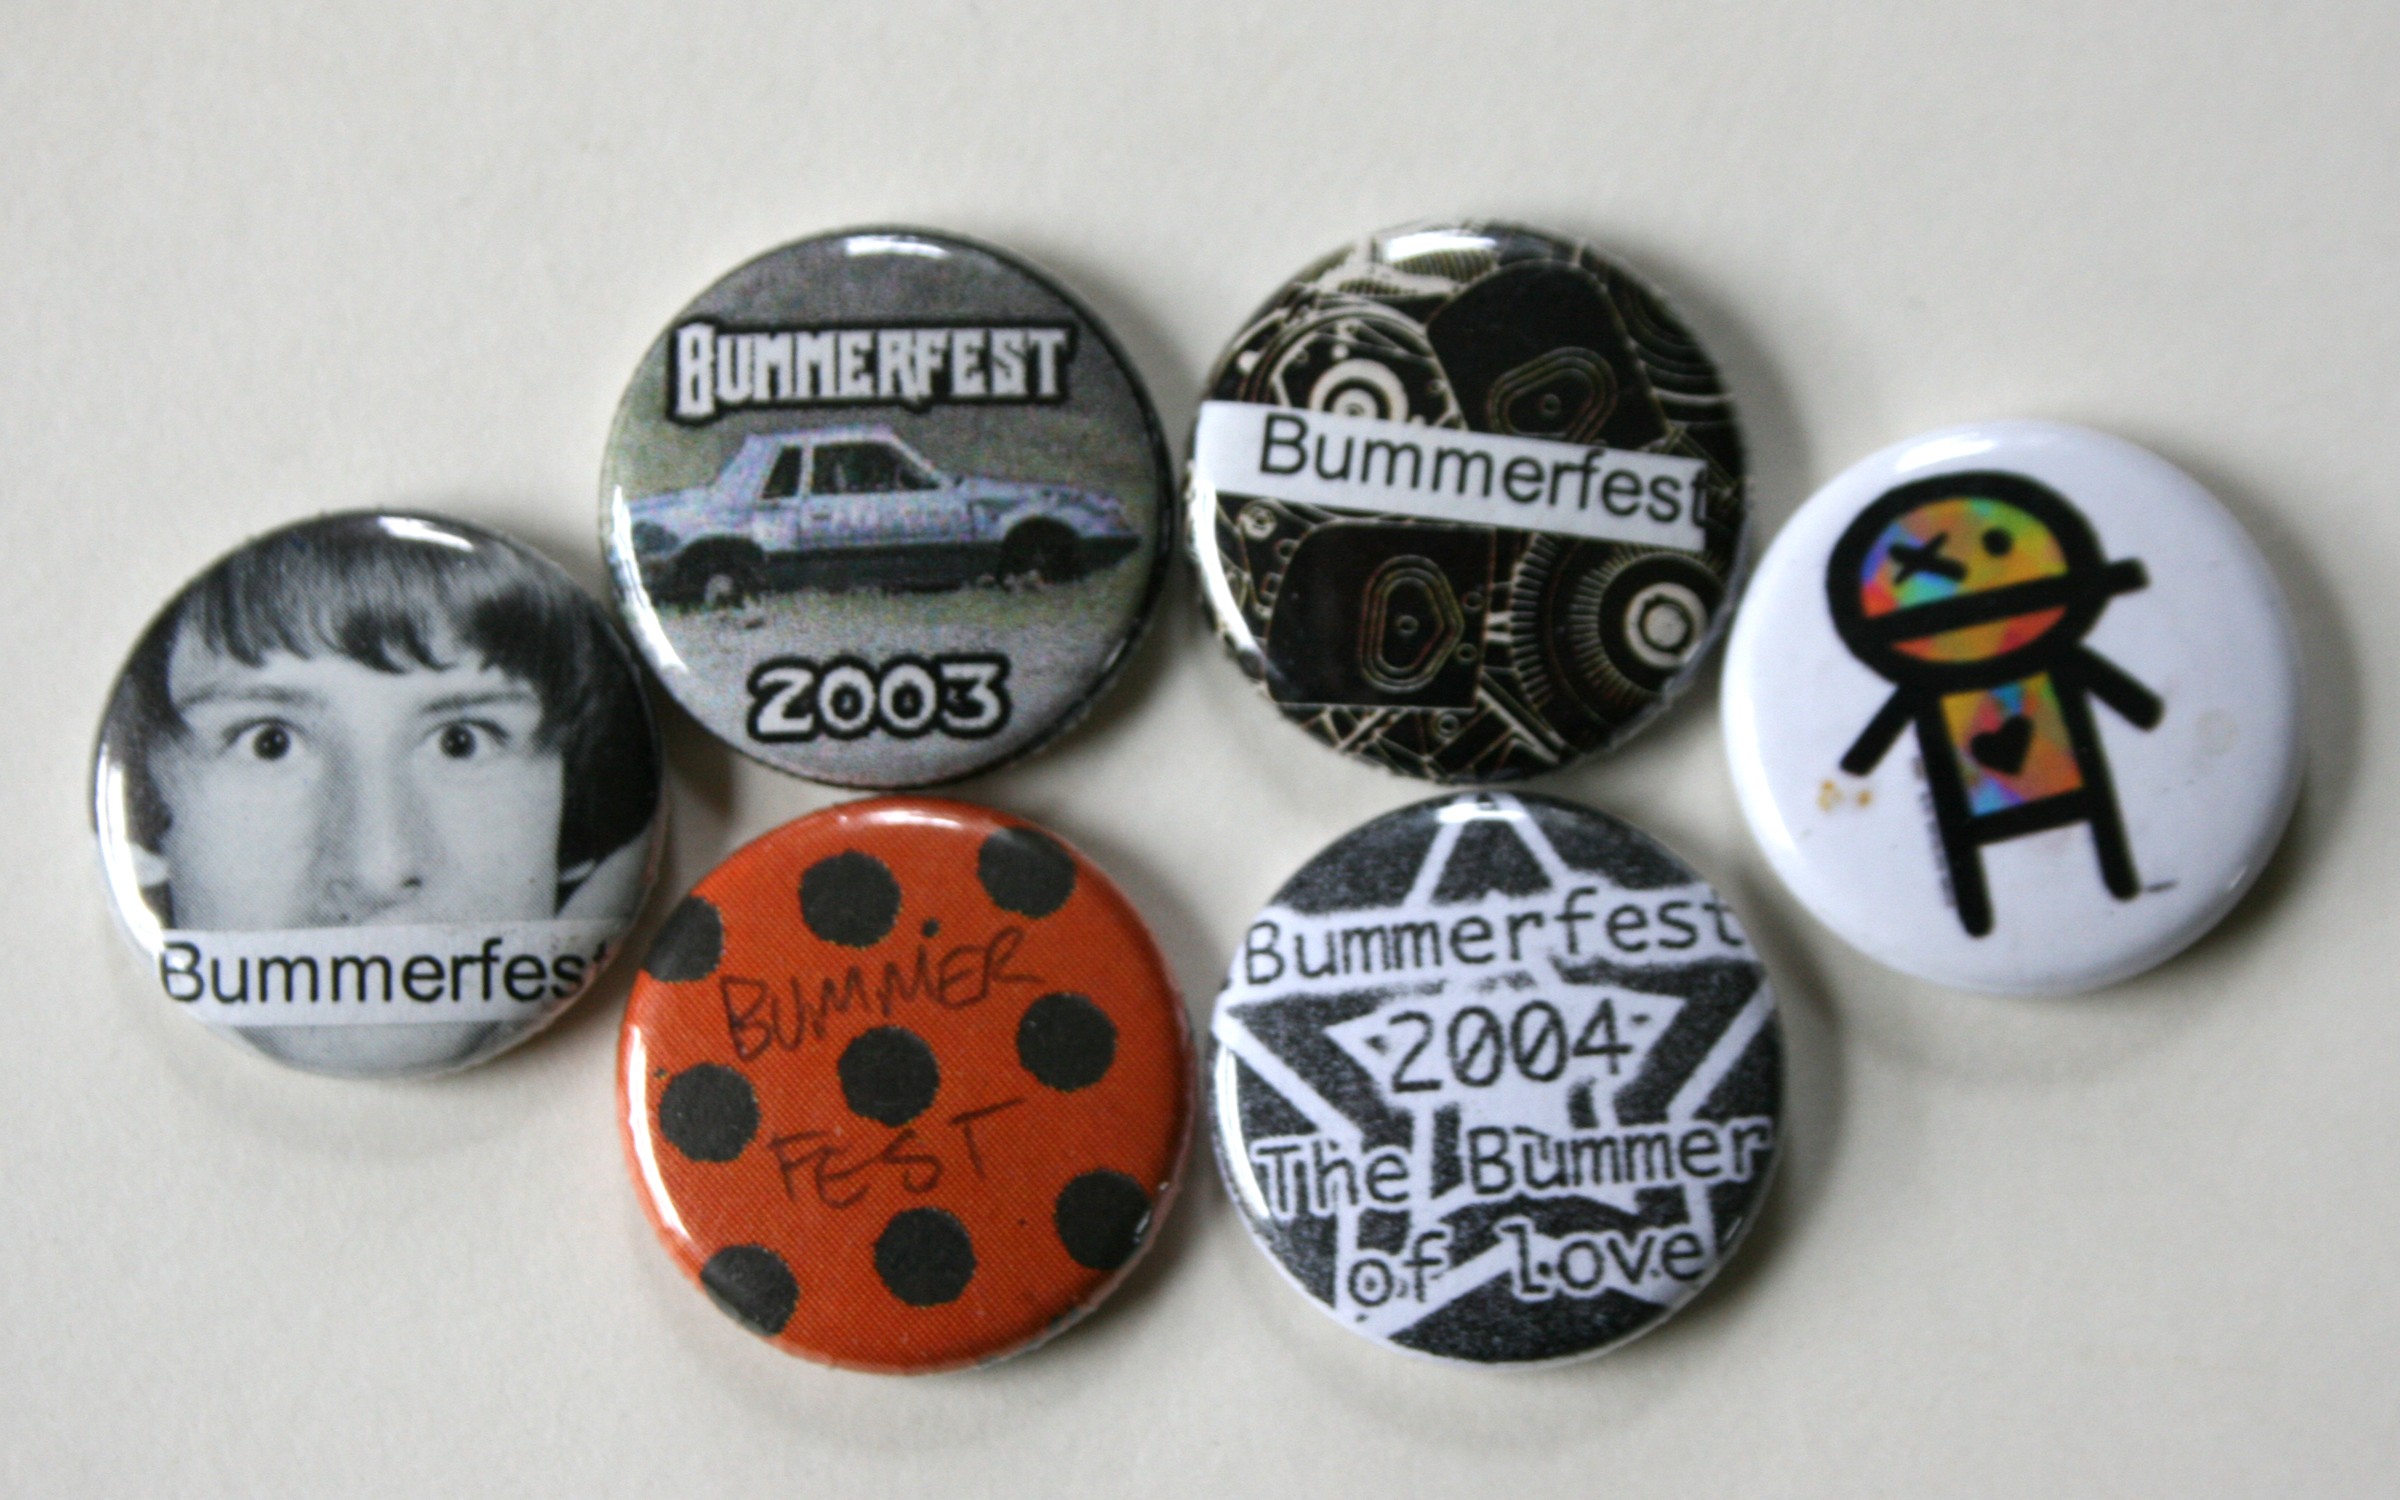 Bummerfest buttons - FROM THE COLLECTION OF BOB DORAN